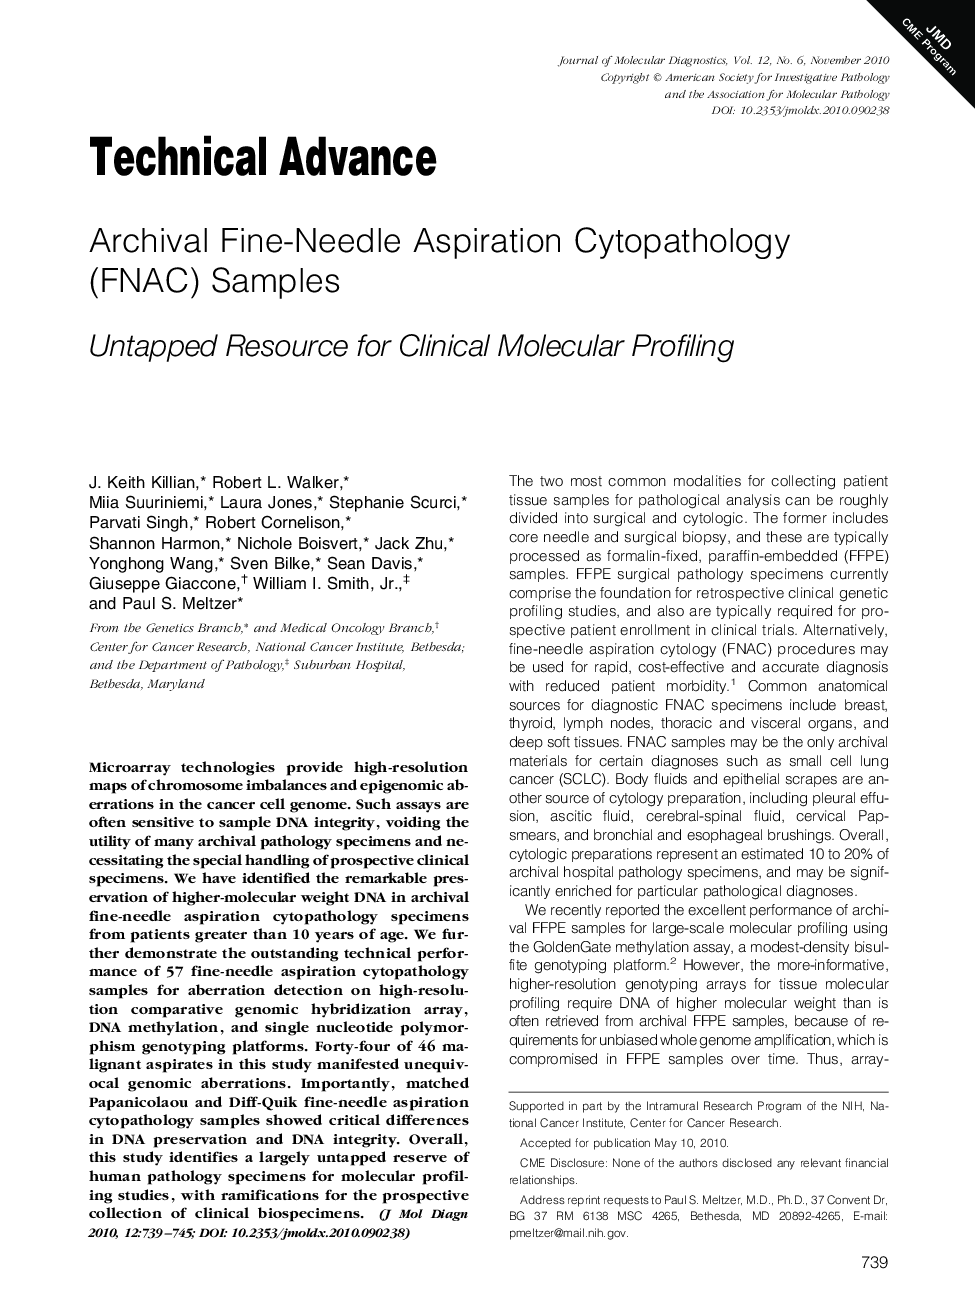 Archival Fine-Needle Aspiration Cytopathology (FNAC) Samples : Untapped Resource for Clinical Molecular Profiling